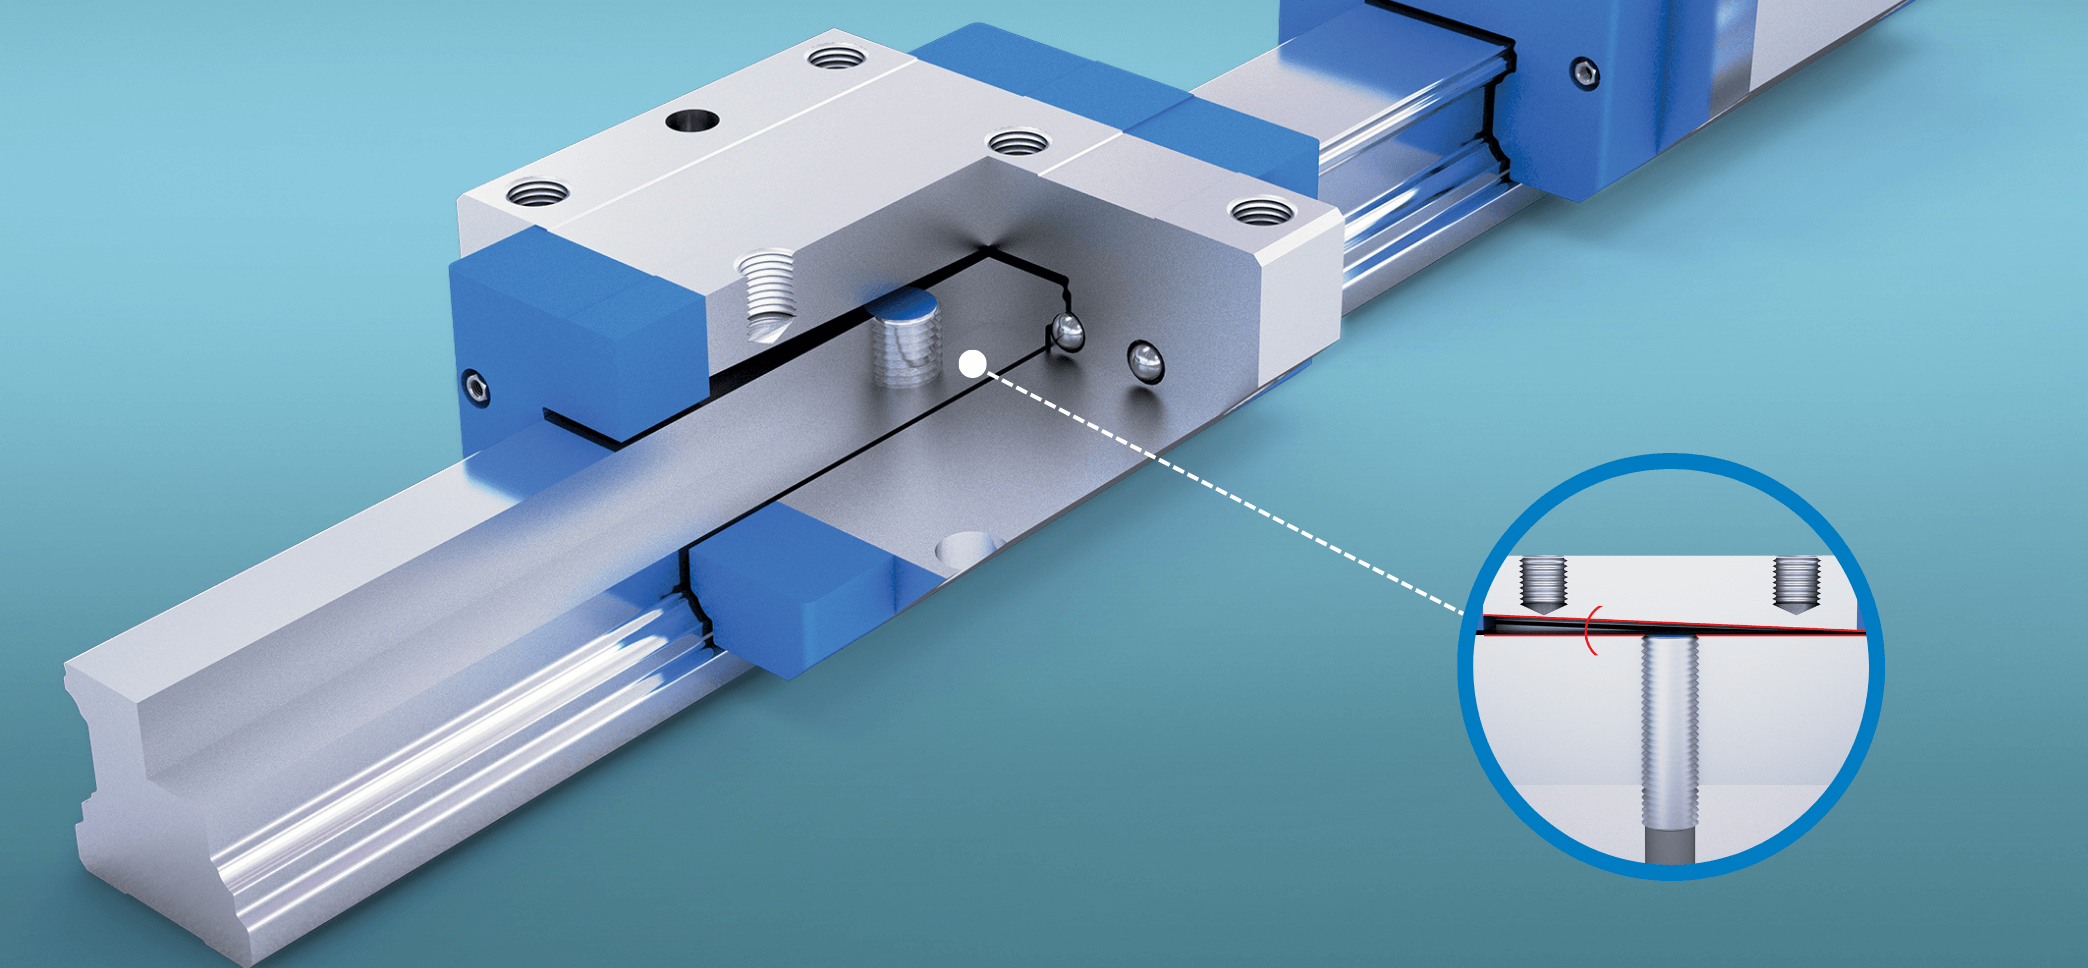 Smart Inductive Sensors Provide Automation Engineers With Affordable High-Precision Position-Control Options For Linear Stages